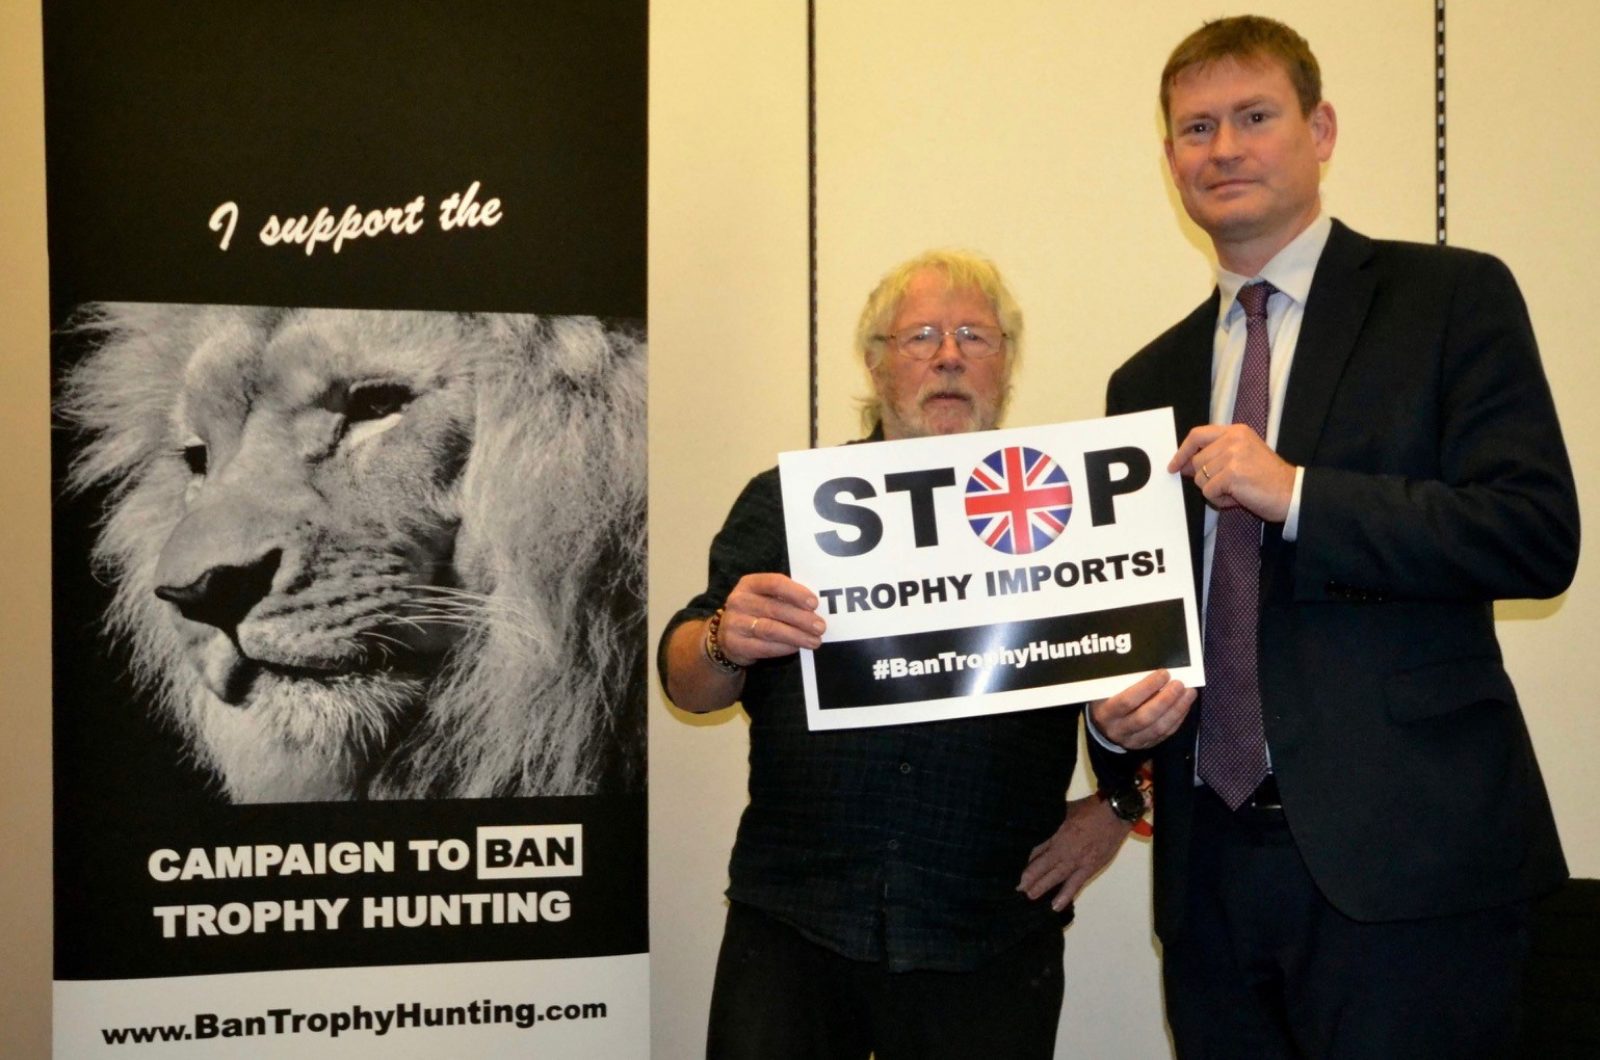 Justin stands against trophy hunting